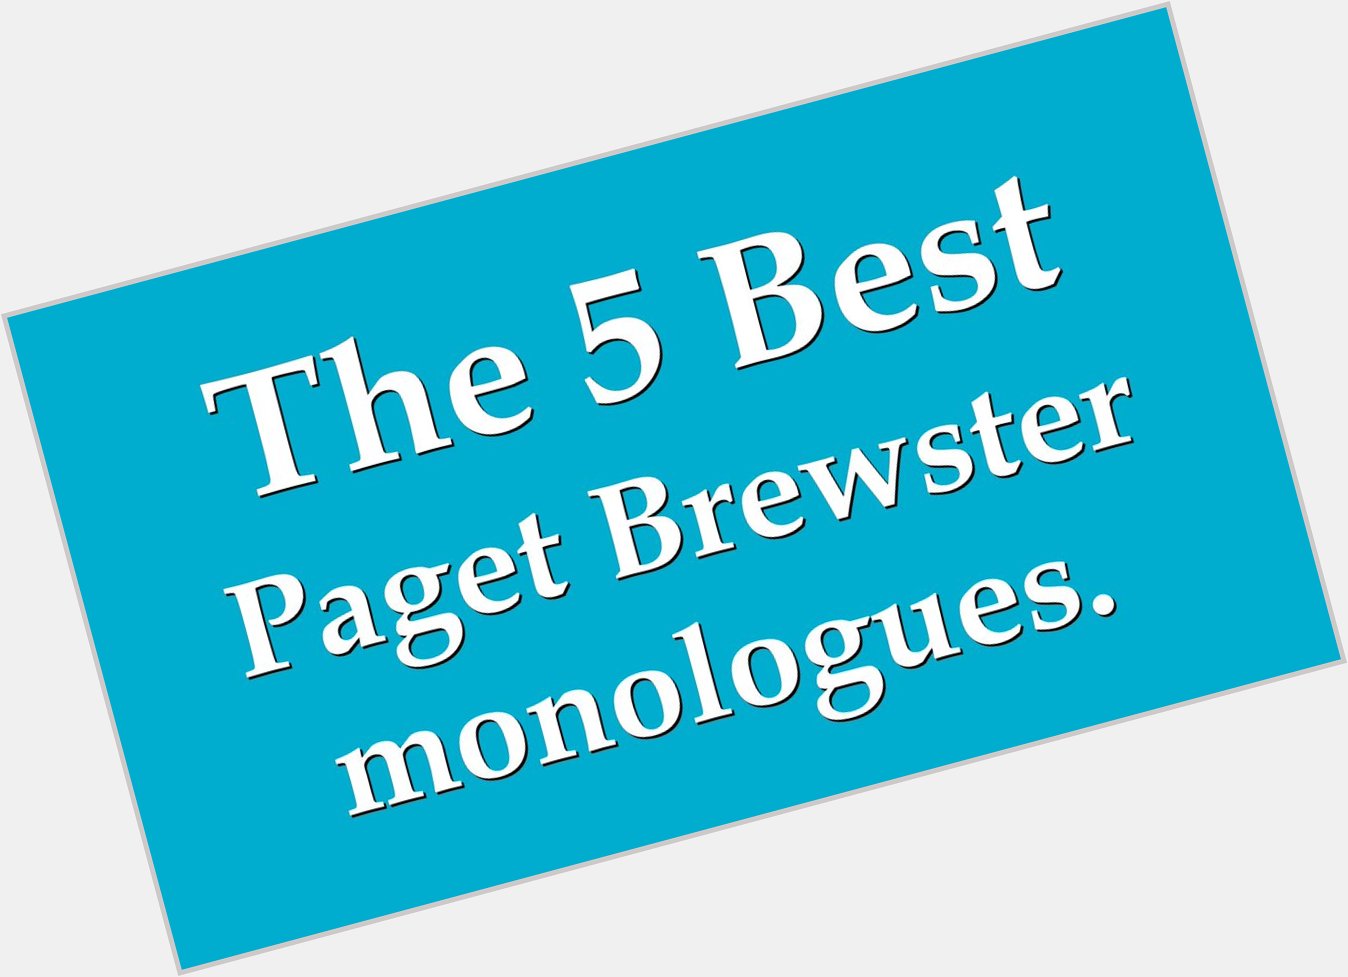 Happy birthday Top 5 Best monologues of Paget Brewster on Community! 